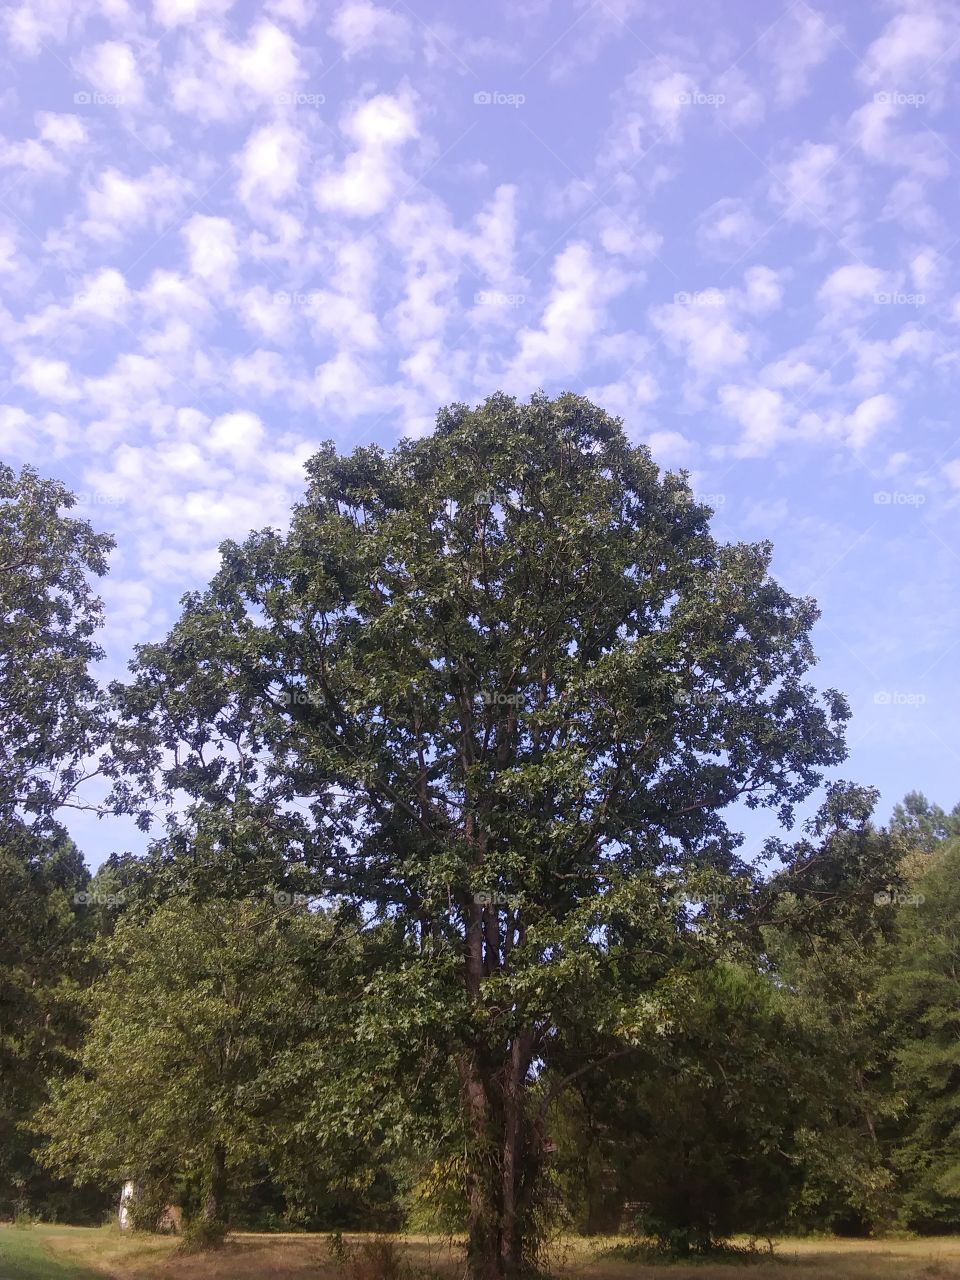 my wonderful view of trees and beautiful sky